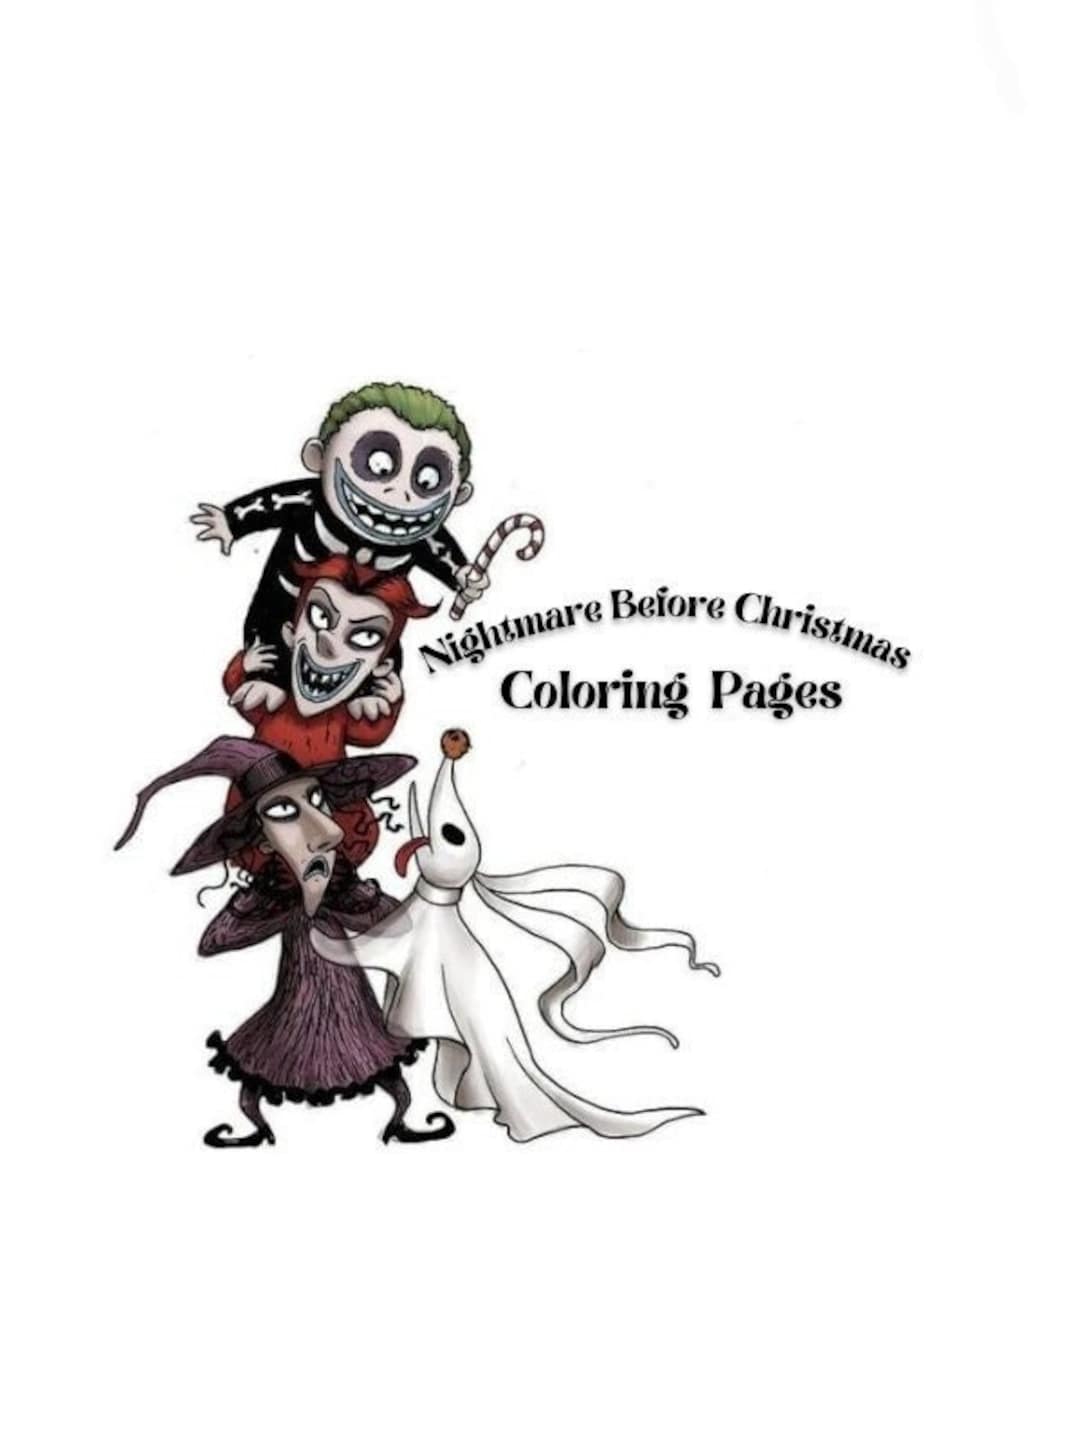 The nightmare before christmas coloring pages illustrations of jack skeleton and more for relaxation